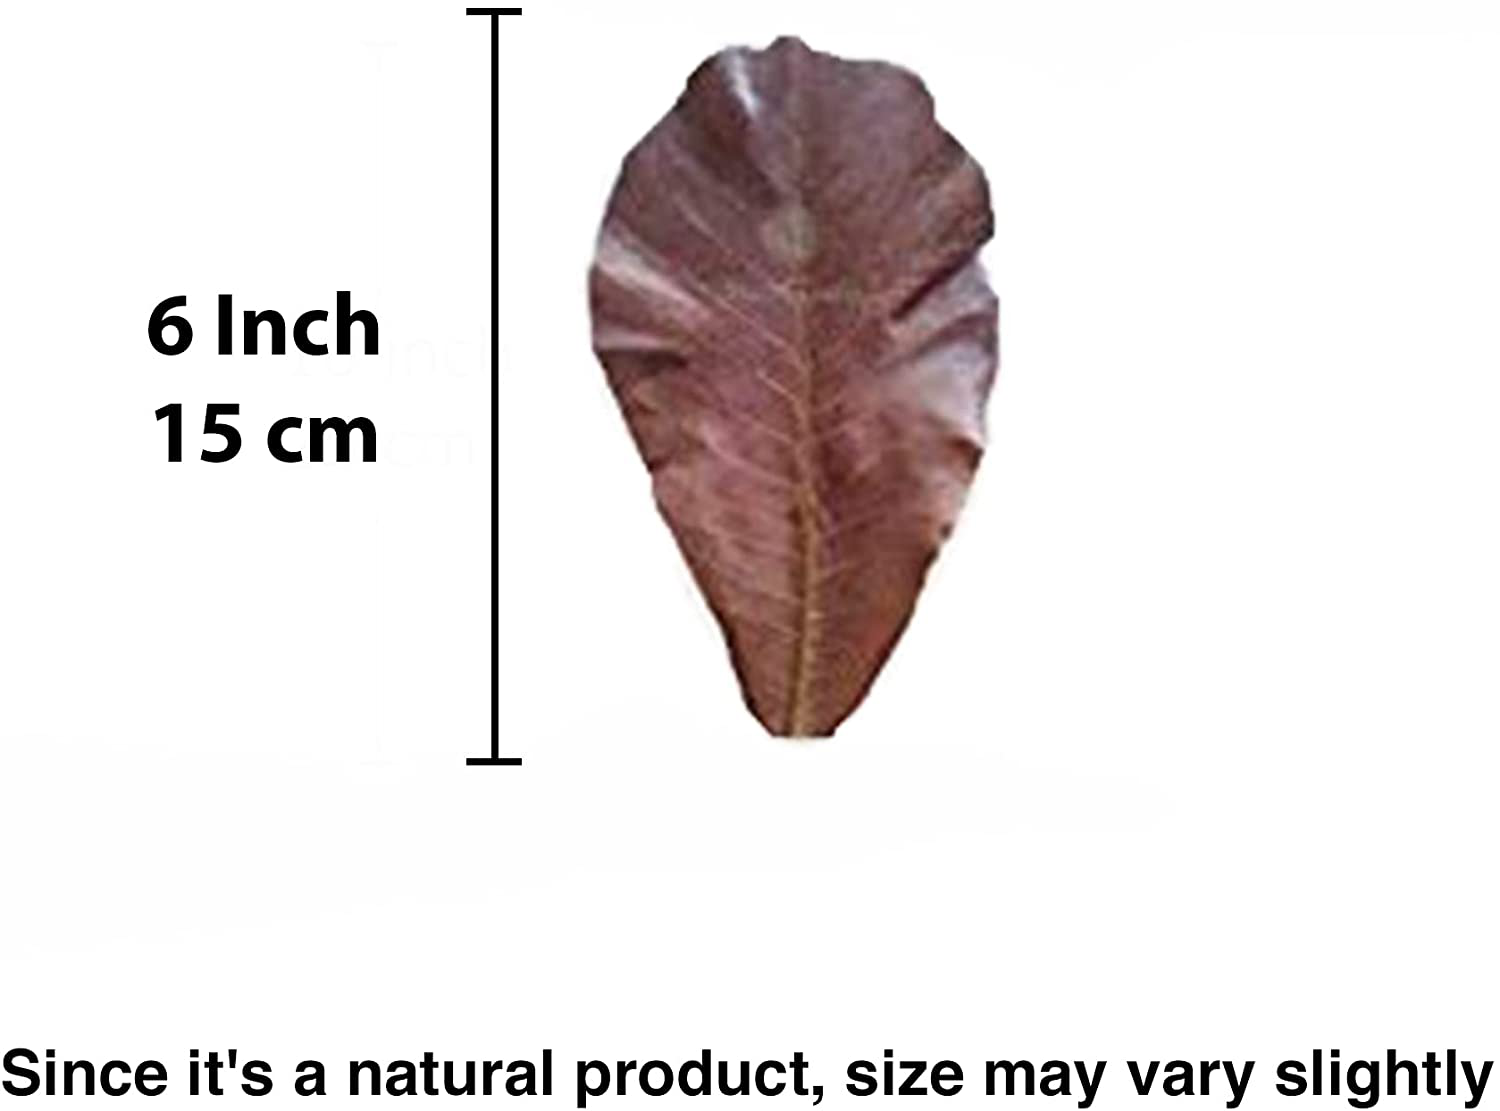 Sungrow Leaf Litter for Reptiles, 6 Inches Leaves, Maintain Humidity in Terrarium, 10 Leaves per Pack